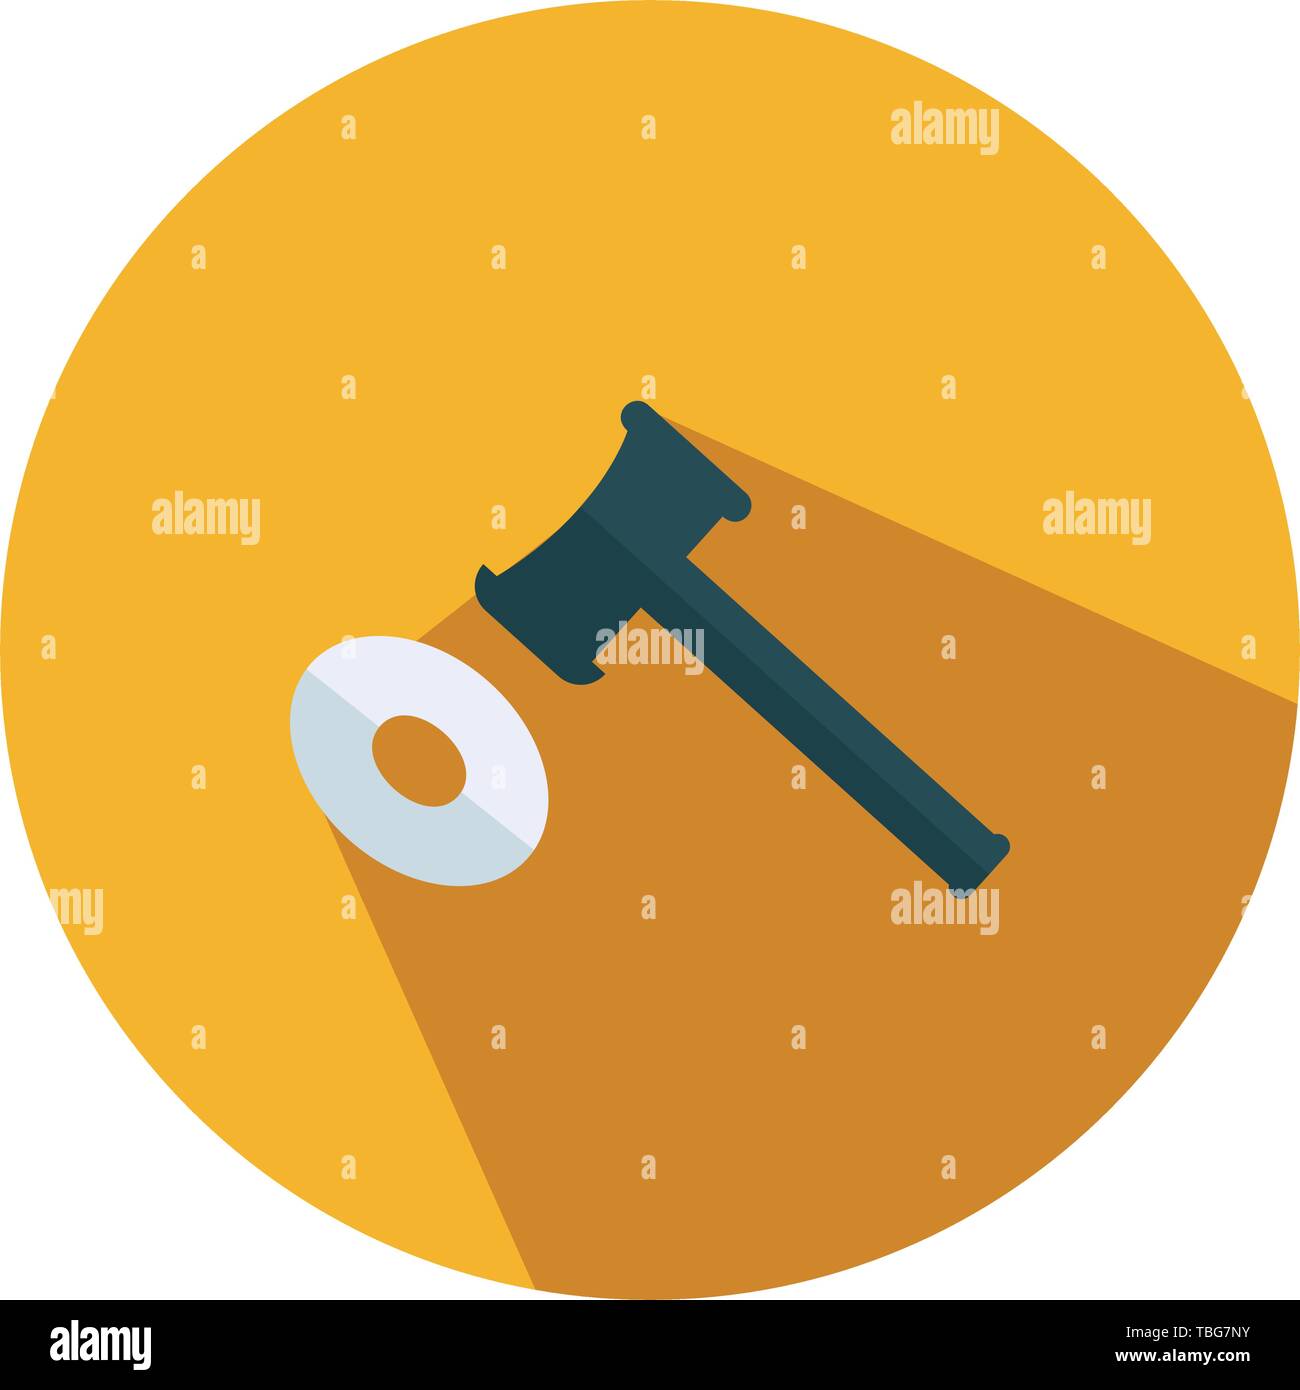 Financial sign - Hammer flat icon Stock Vector